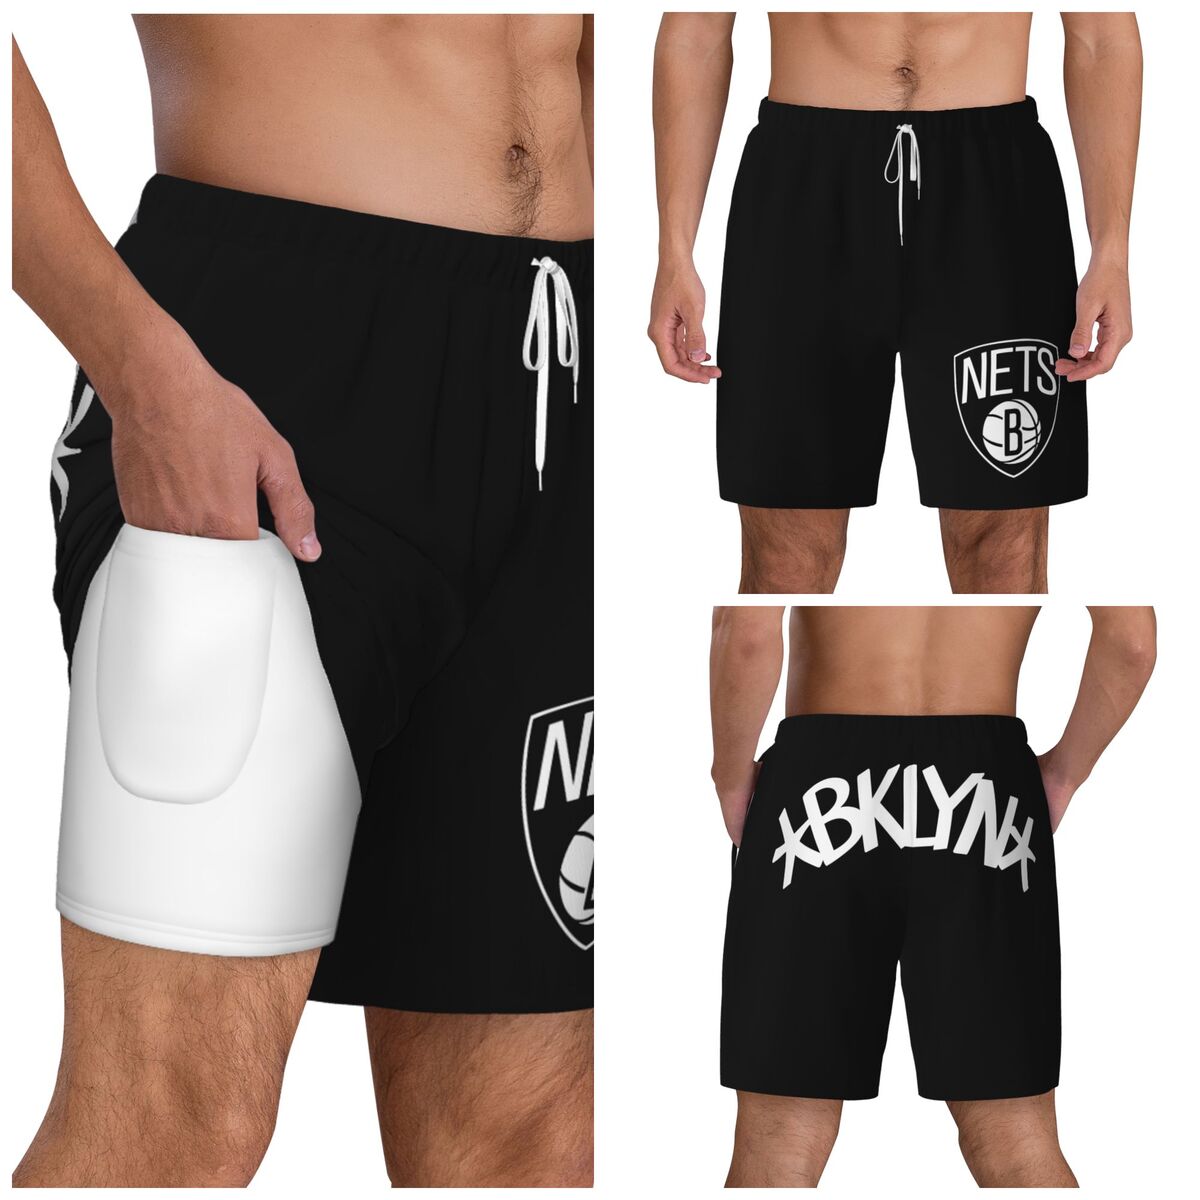 Brooklyn Nets Men's Swim Trunks with Compression Liner